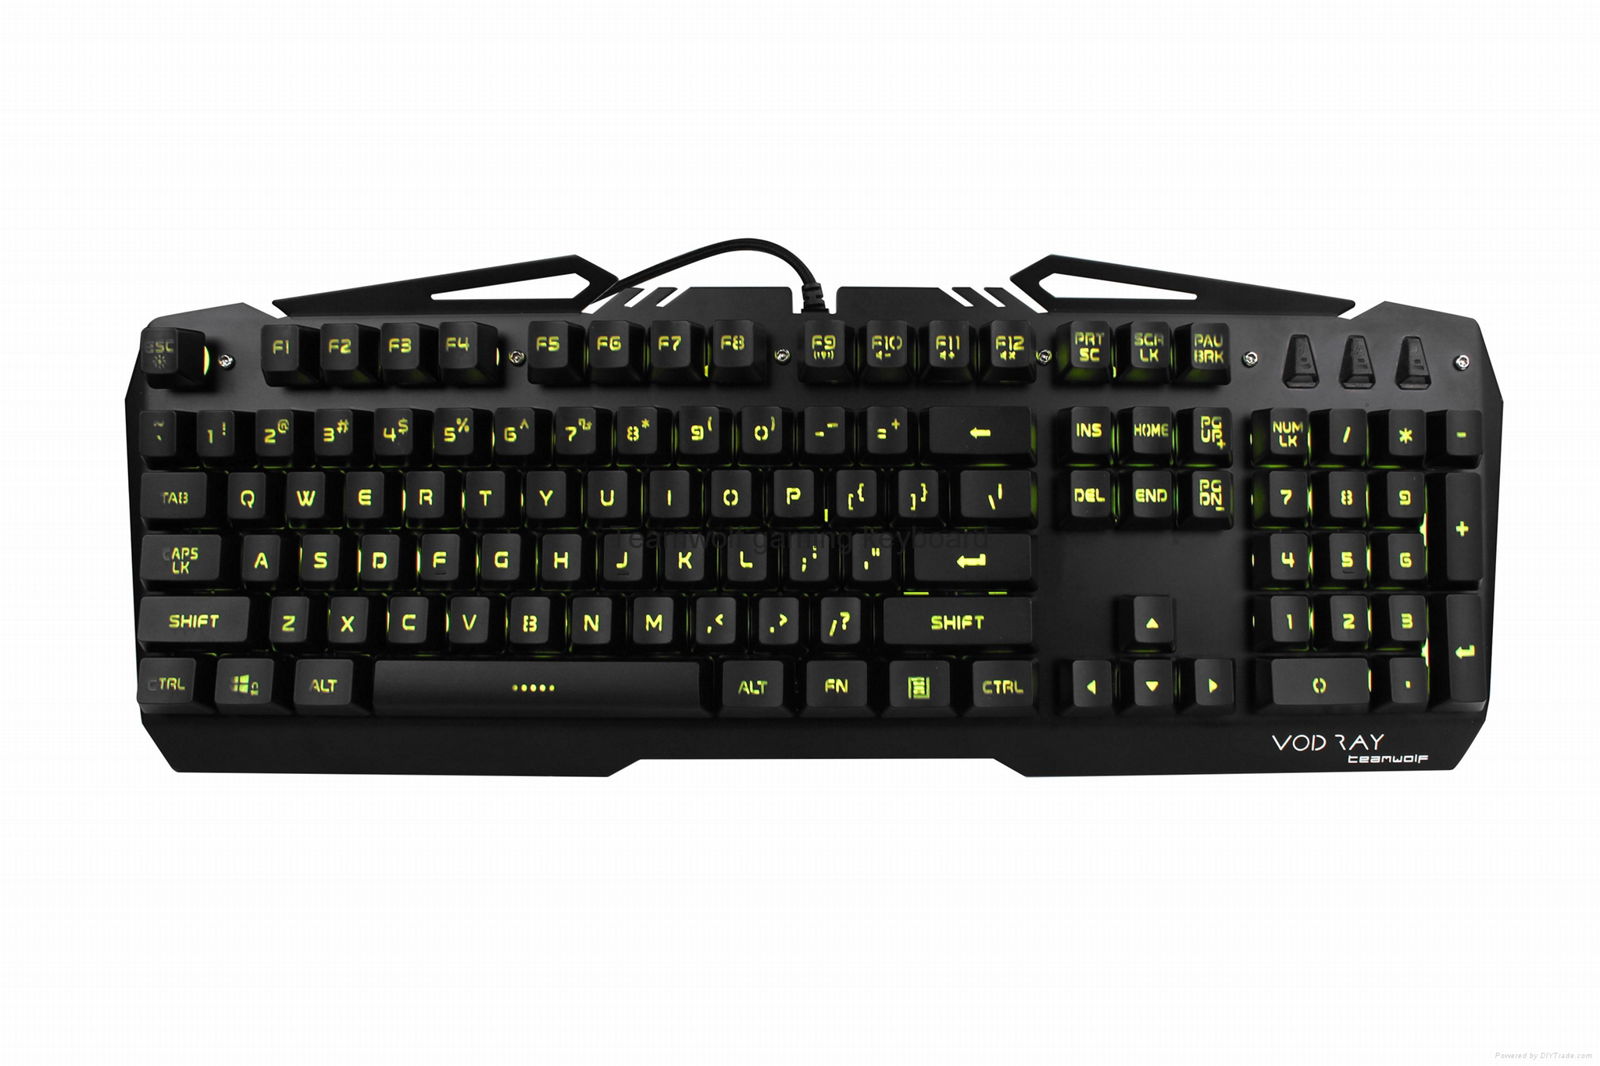 Arbiter-TEAMWOLF wired Membrain gaming keyboard with color Mixed light-G13